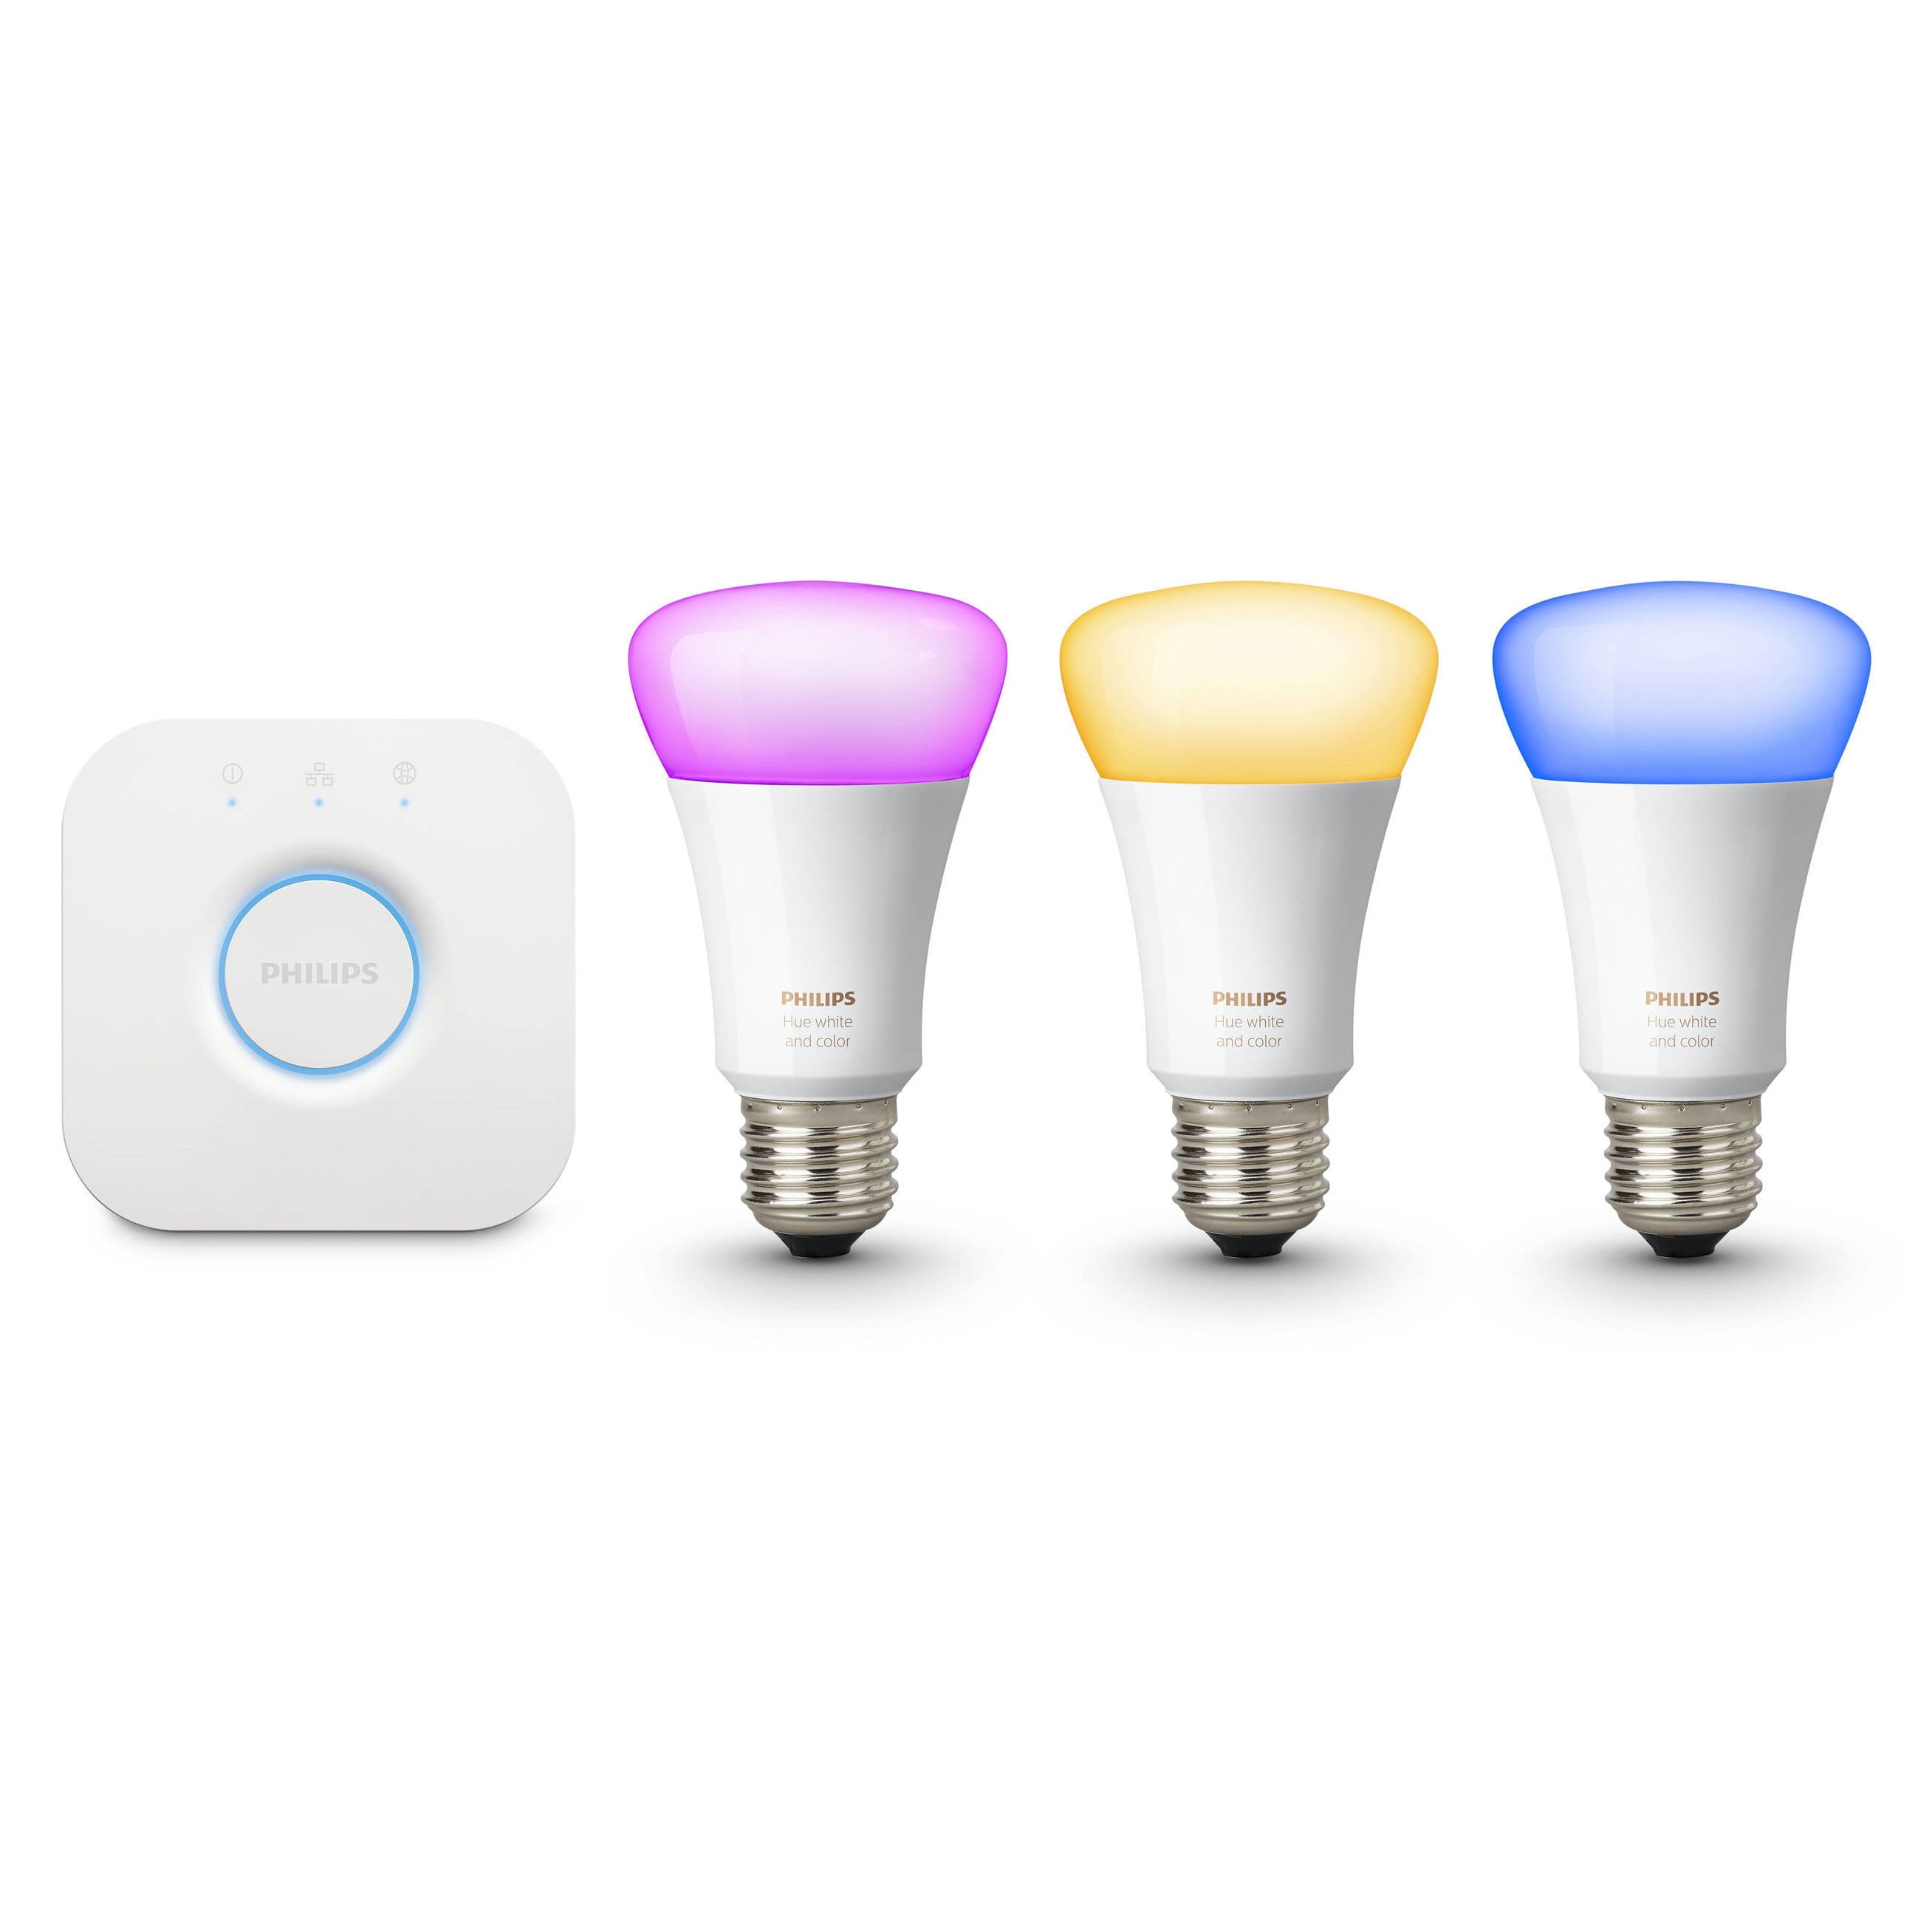 Philips Hue White Ambiance A19 4-Bulbs with Dimmer Renewed Hue 3rd Gen Smart Bridge 